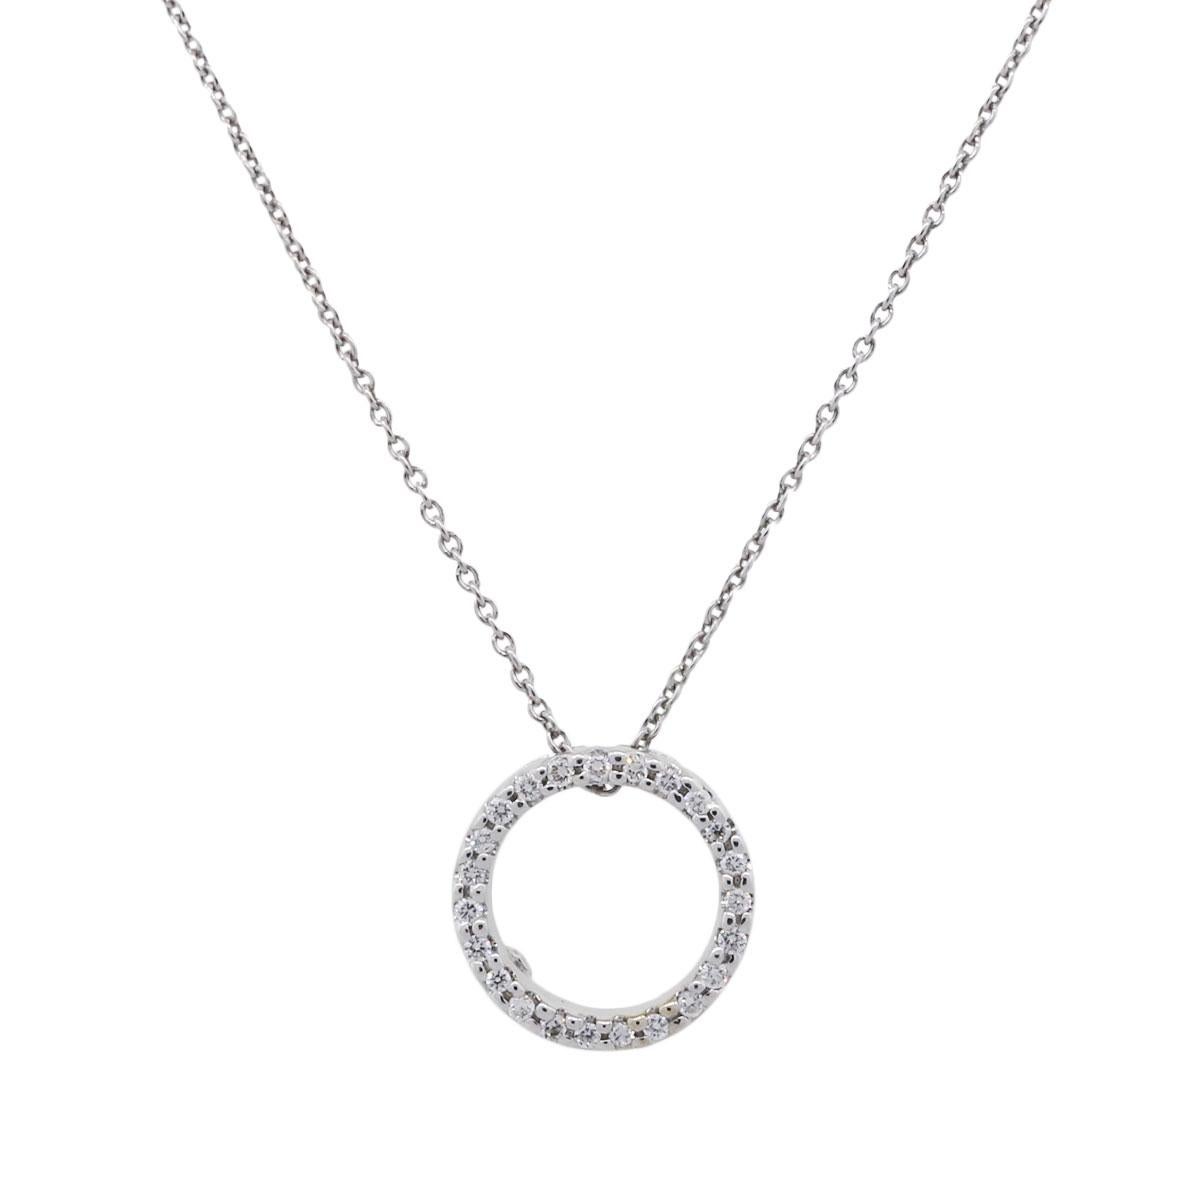 Designer: Roberto Coin
Material: 18k white gold
Diamond Details: Approximately 0.12ctw of round brilliant diamonds. Diamonds are F/G in color, VS in clarity
Necklace Measurements: Necklace measures 16″
Pendant Measurements: Pendant measures 0.46″ x